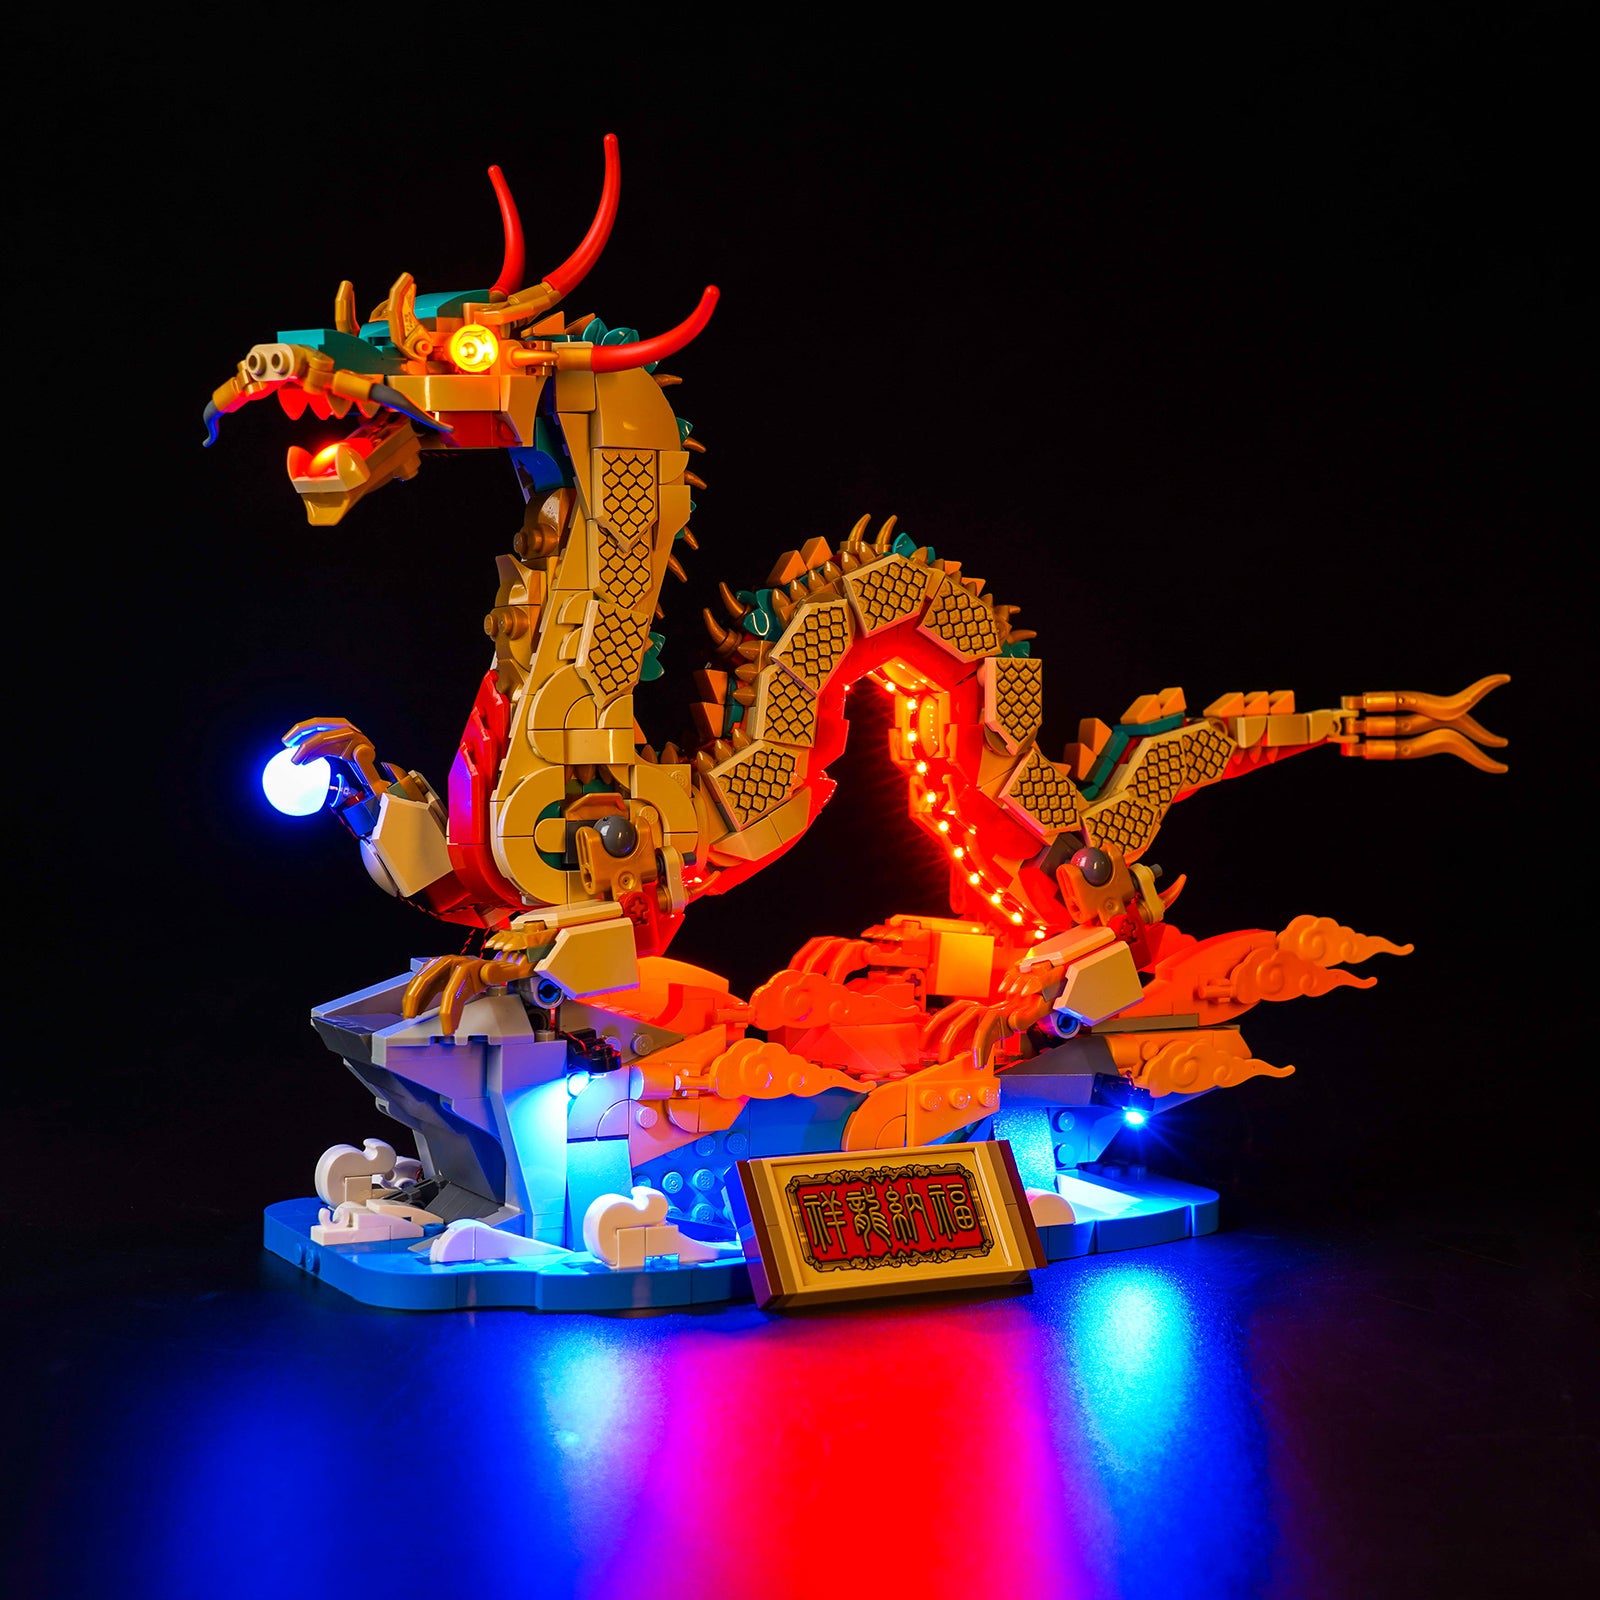 Year of the dragon Lego light